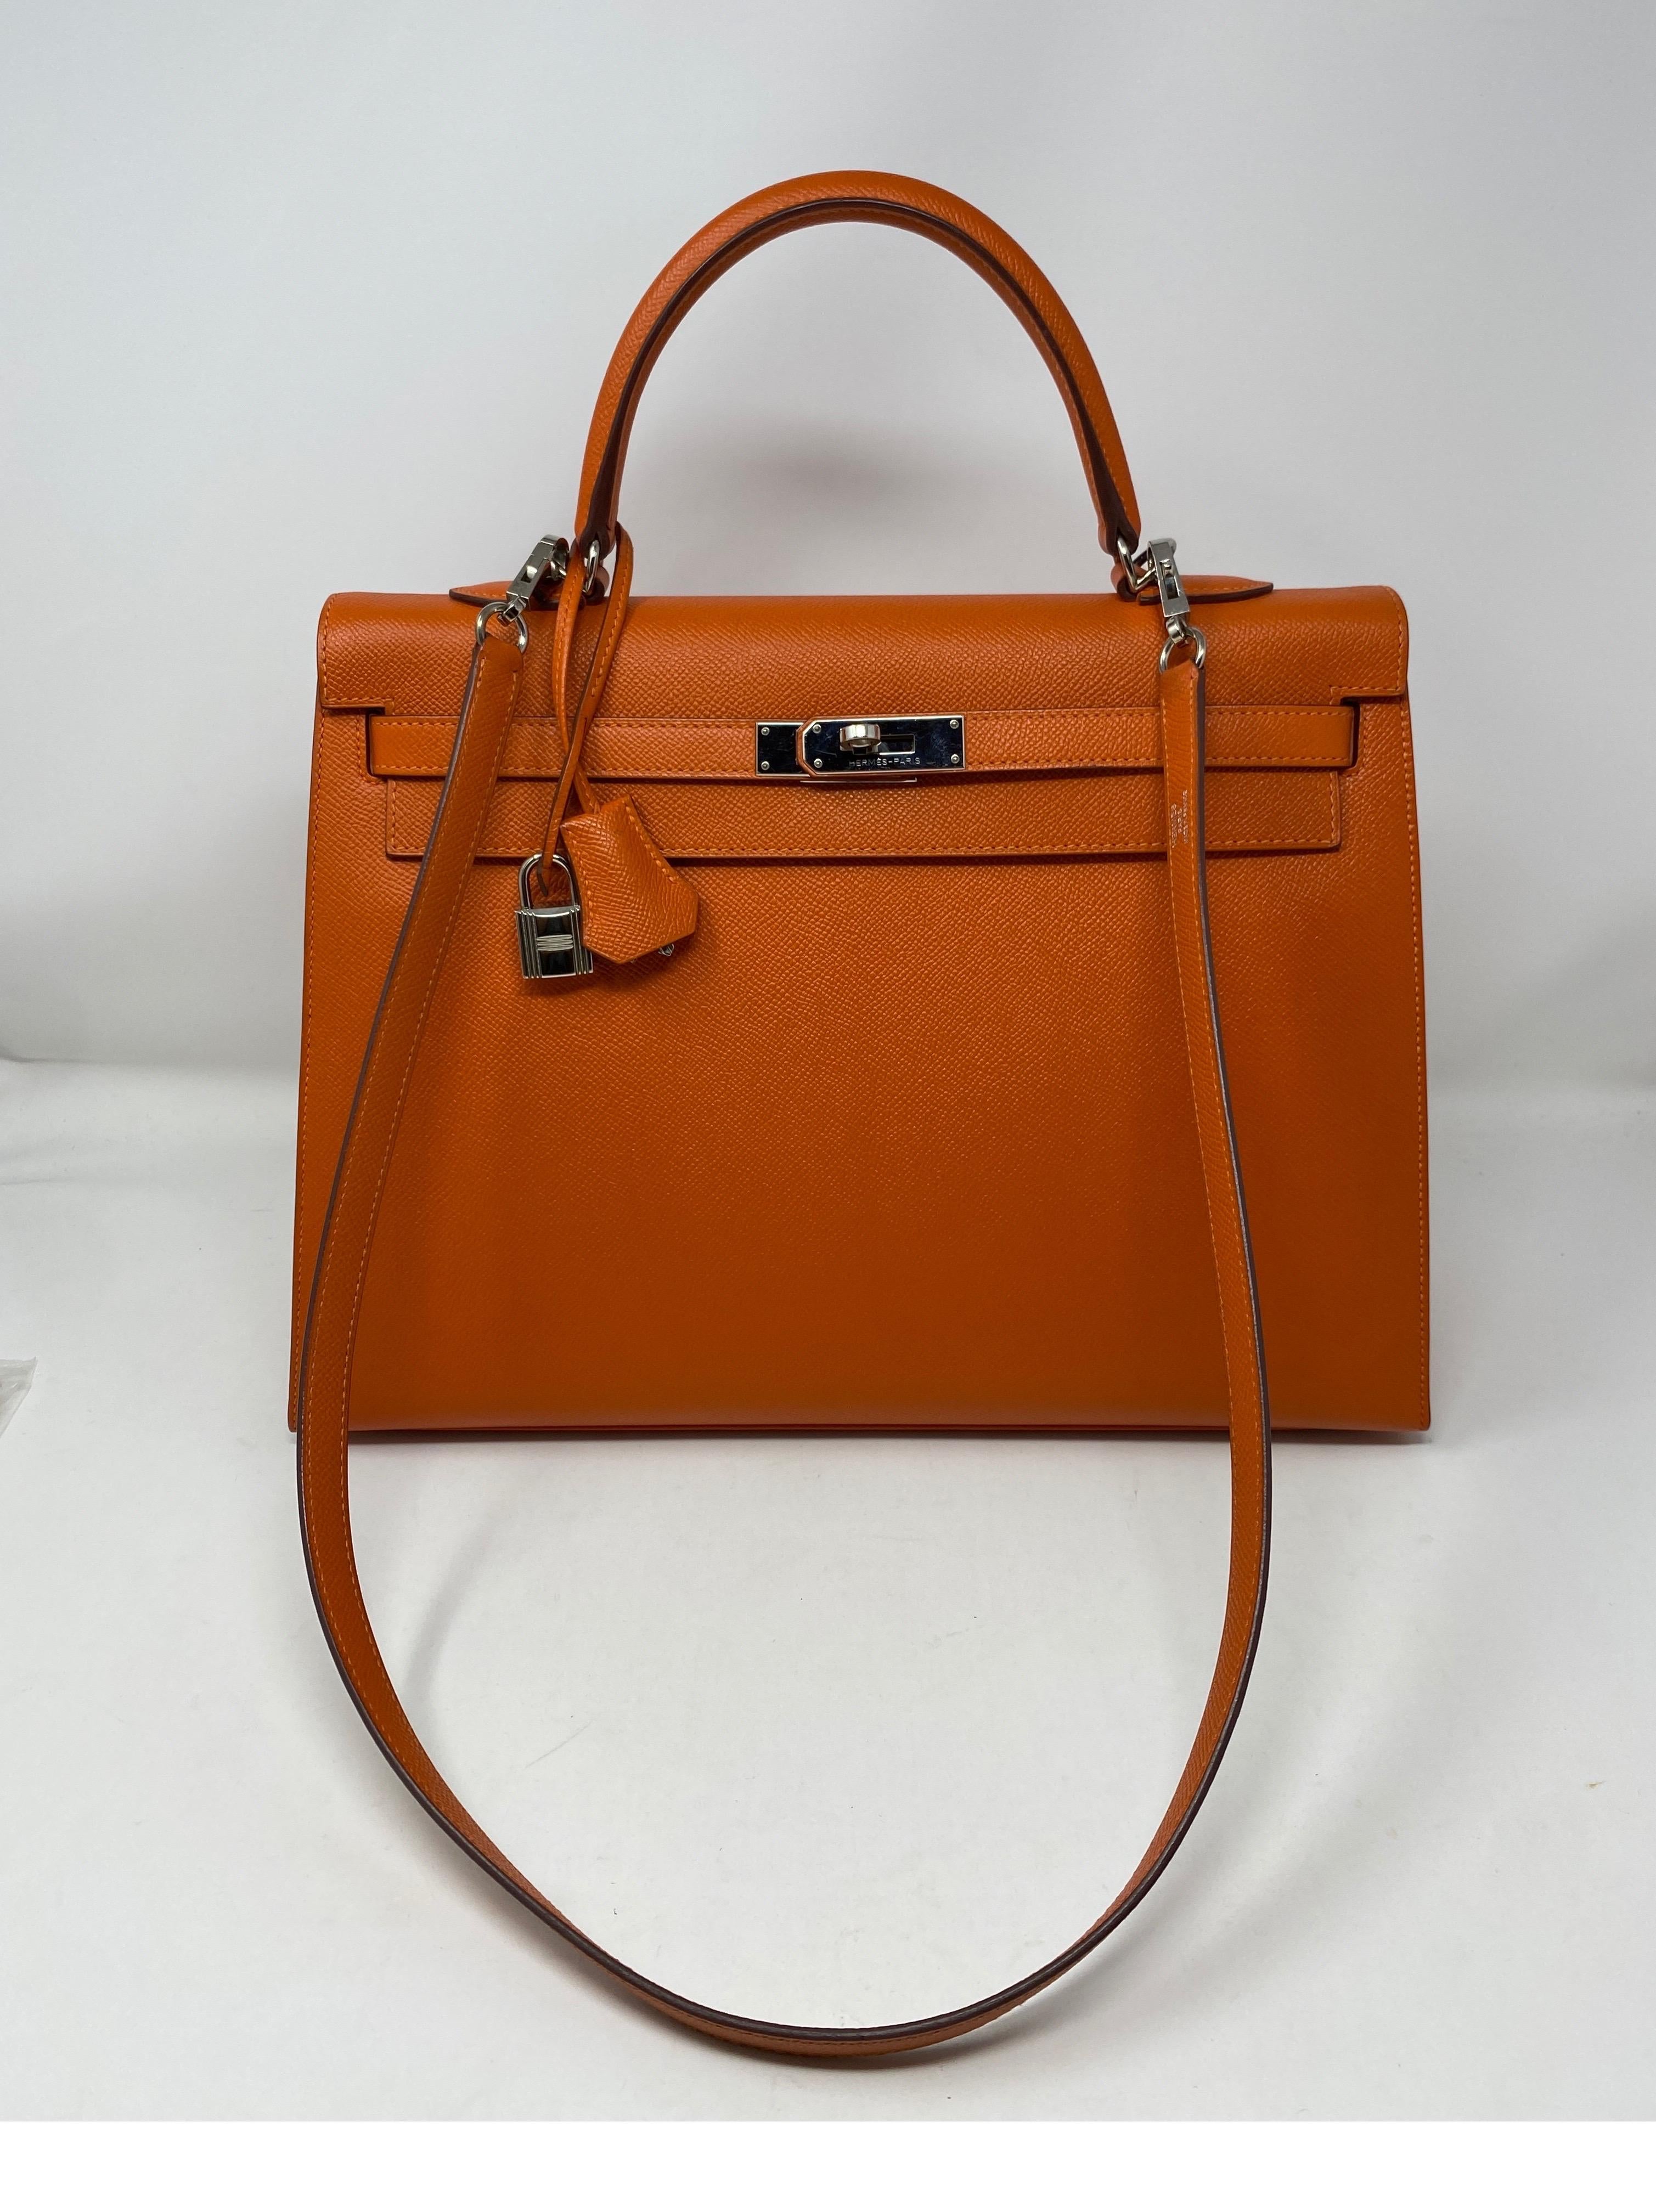 Hermes Feu Orange Kelly 35 Sellier Bag. Mint like new condition. Plastic is still on hardware. Palladium hardware. Very hard to find sellier Kelly bag. The bag stays up no slouch. Great look. Most are retourne. This one is a collector's piece.